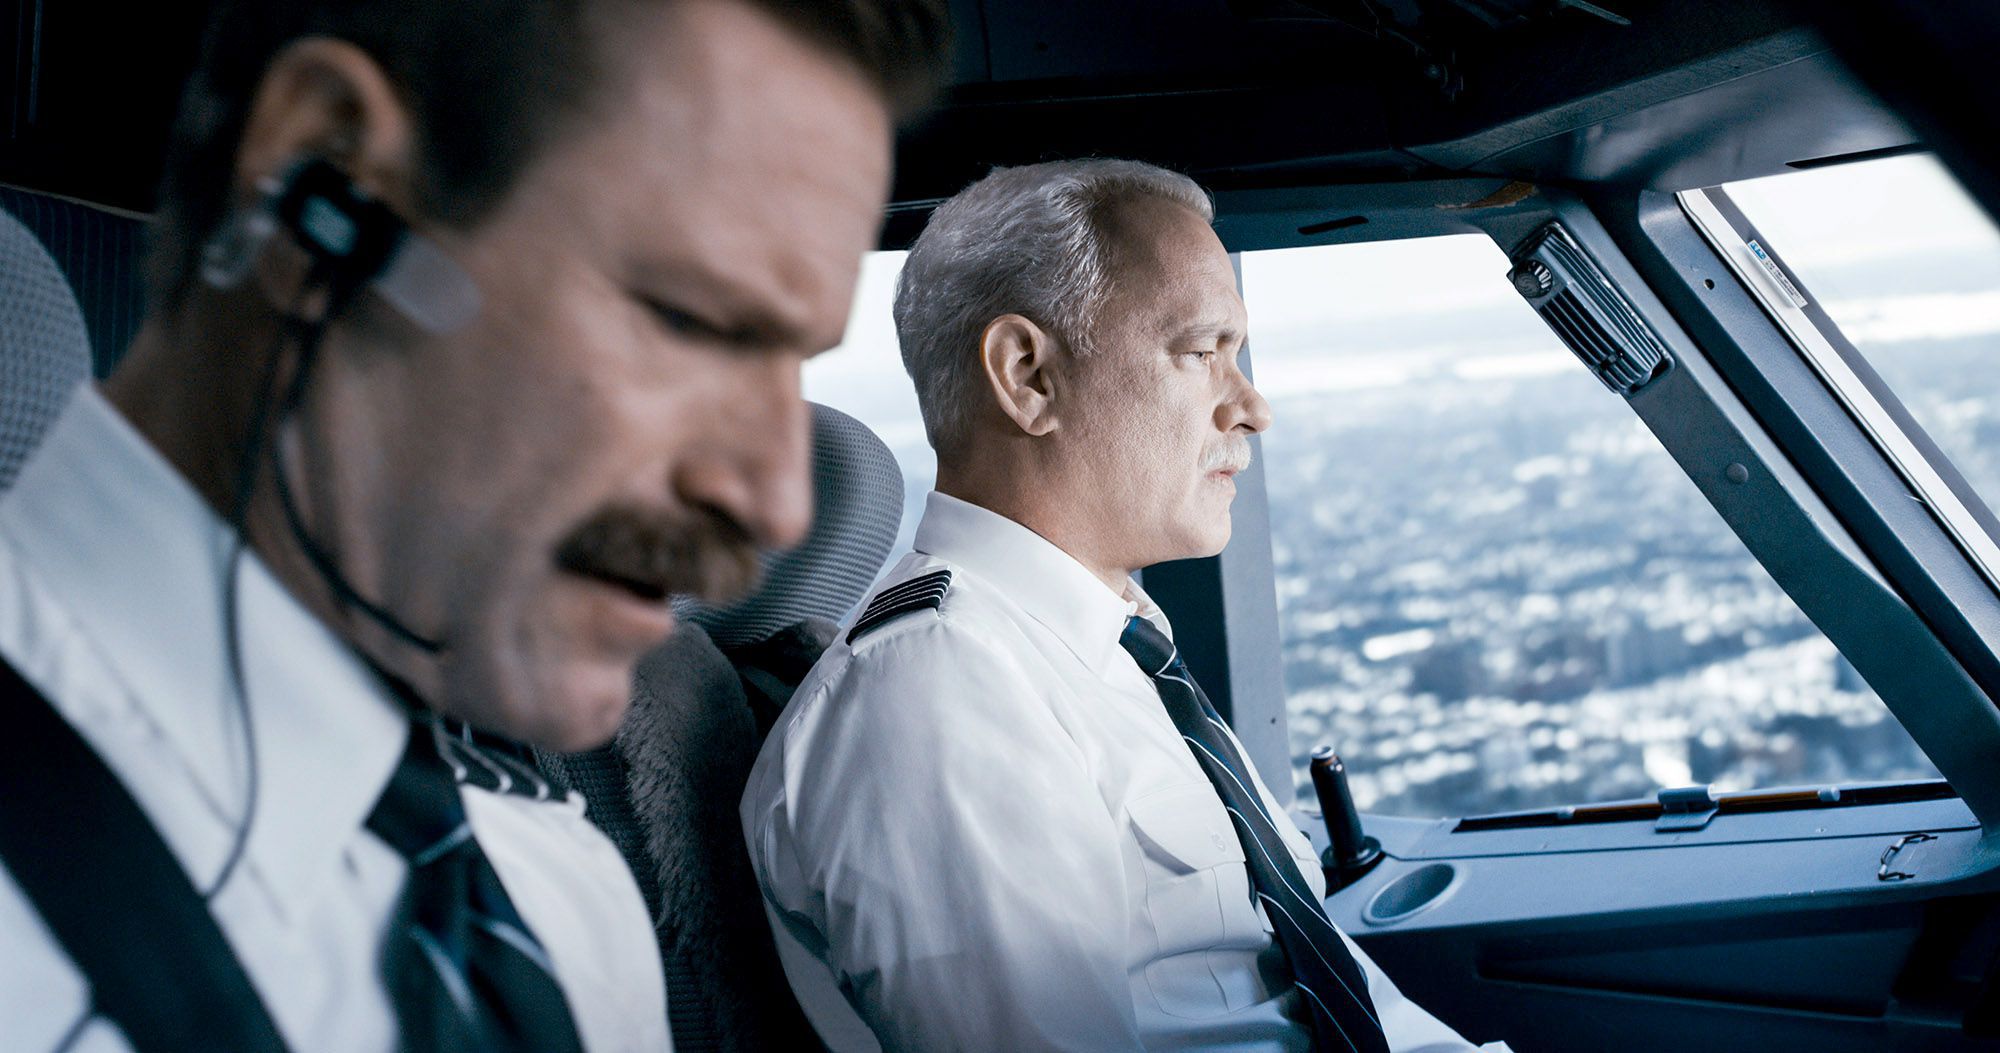 (L-r) Aaron Eckhart as Jeff Skiles and Tom Hanks as Chesley "Sully" Sullenberger in "Sully." MUST CREDIT: Warner Bros. Pictures